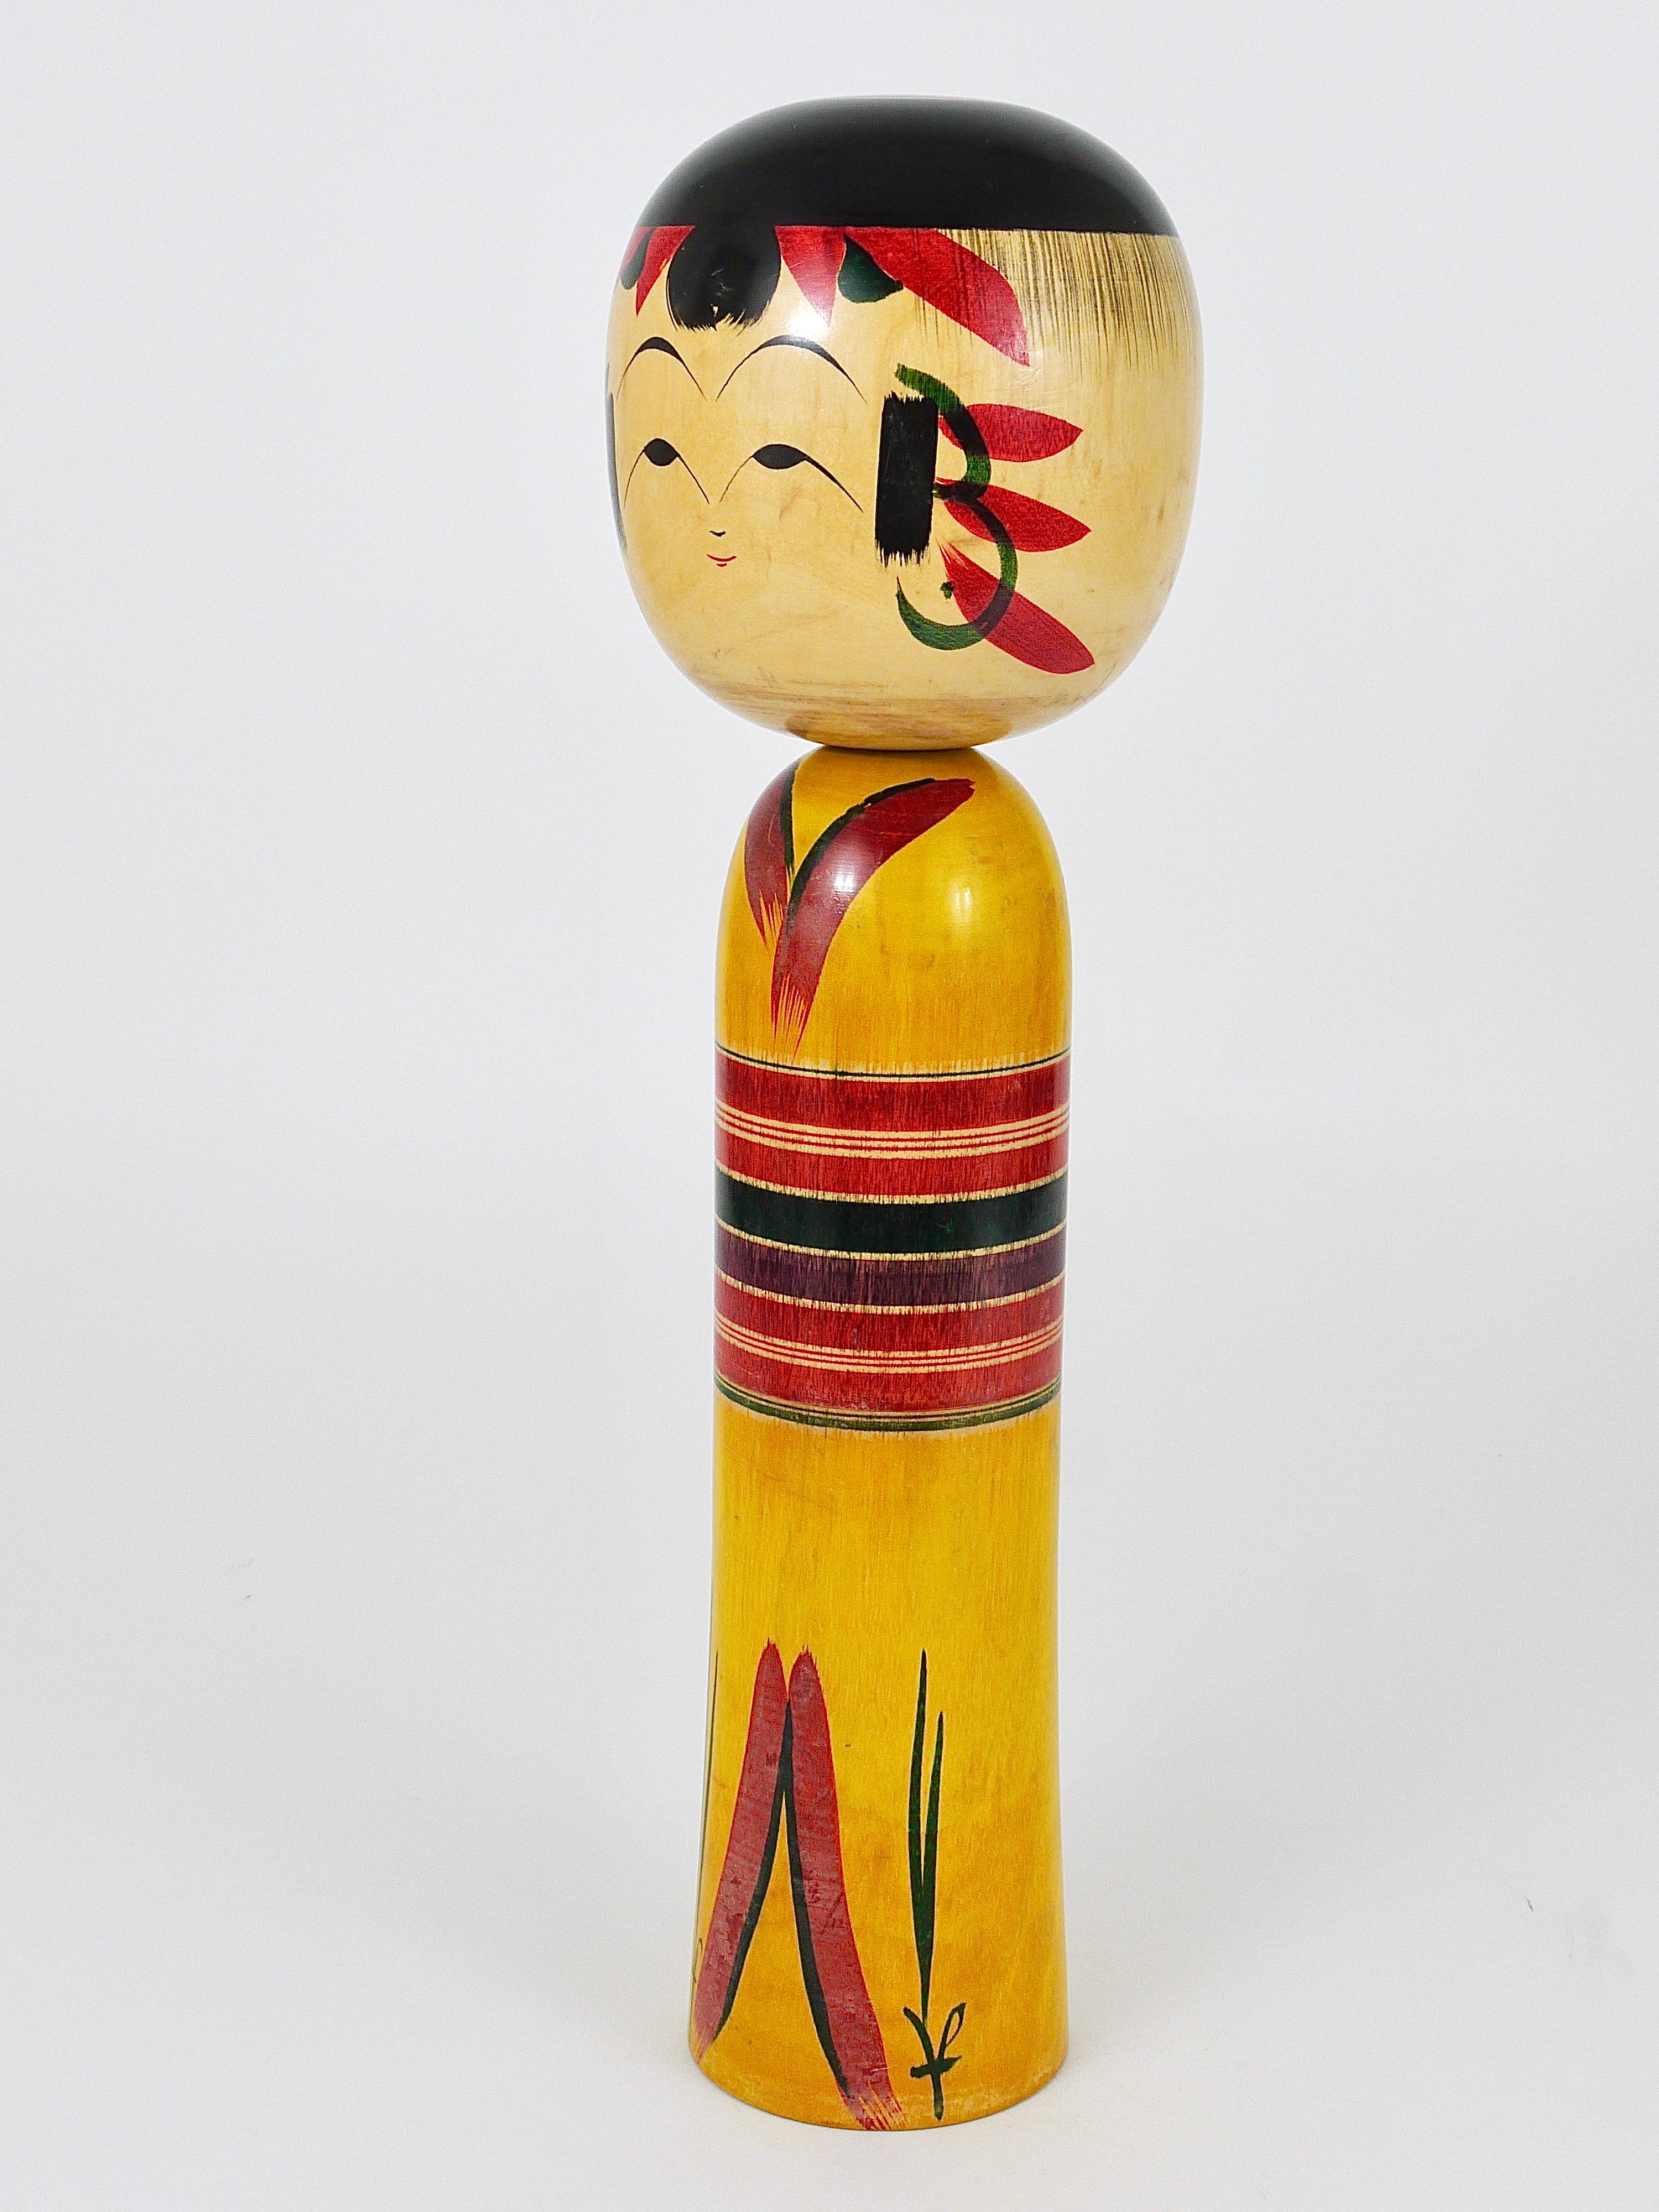 Decorative Kokeshi Doll Sculpture from Northern Japan, Hand-Painted, Signed 2